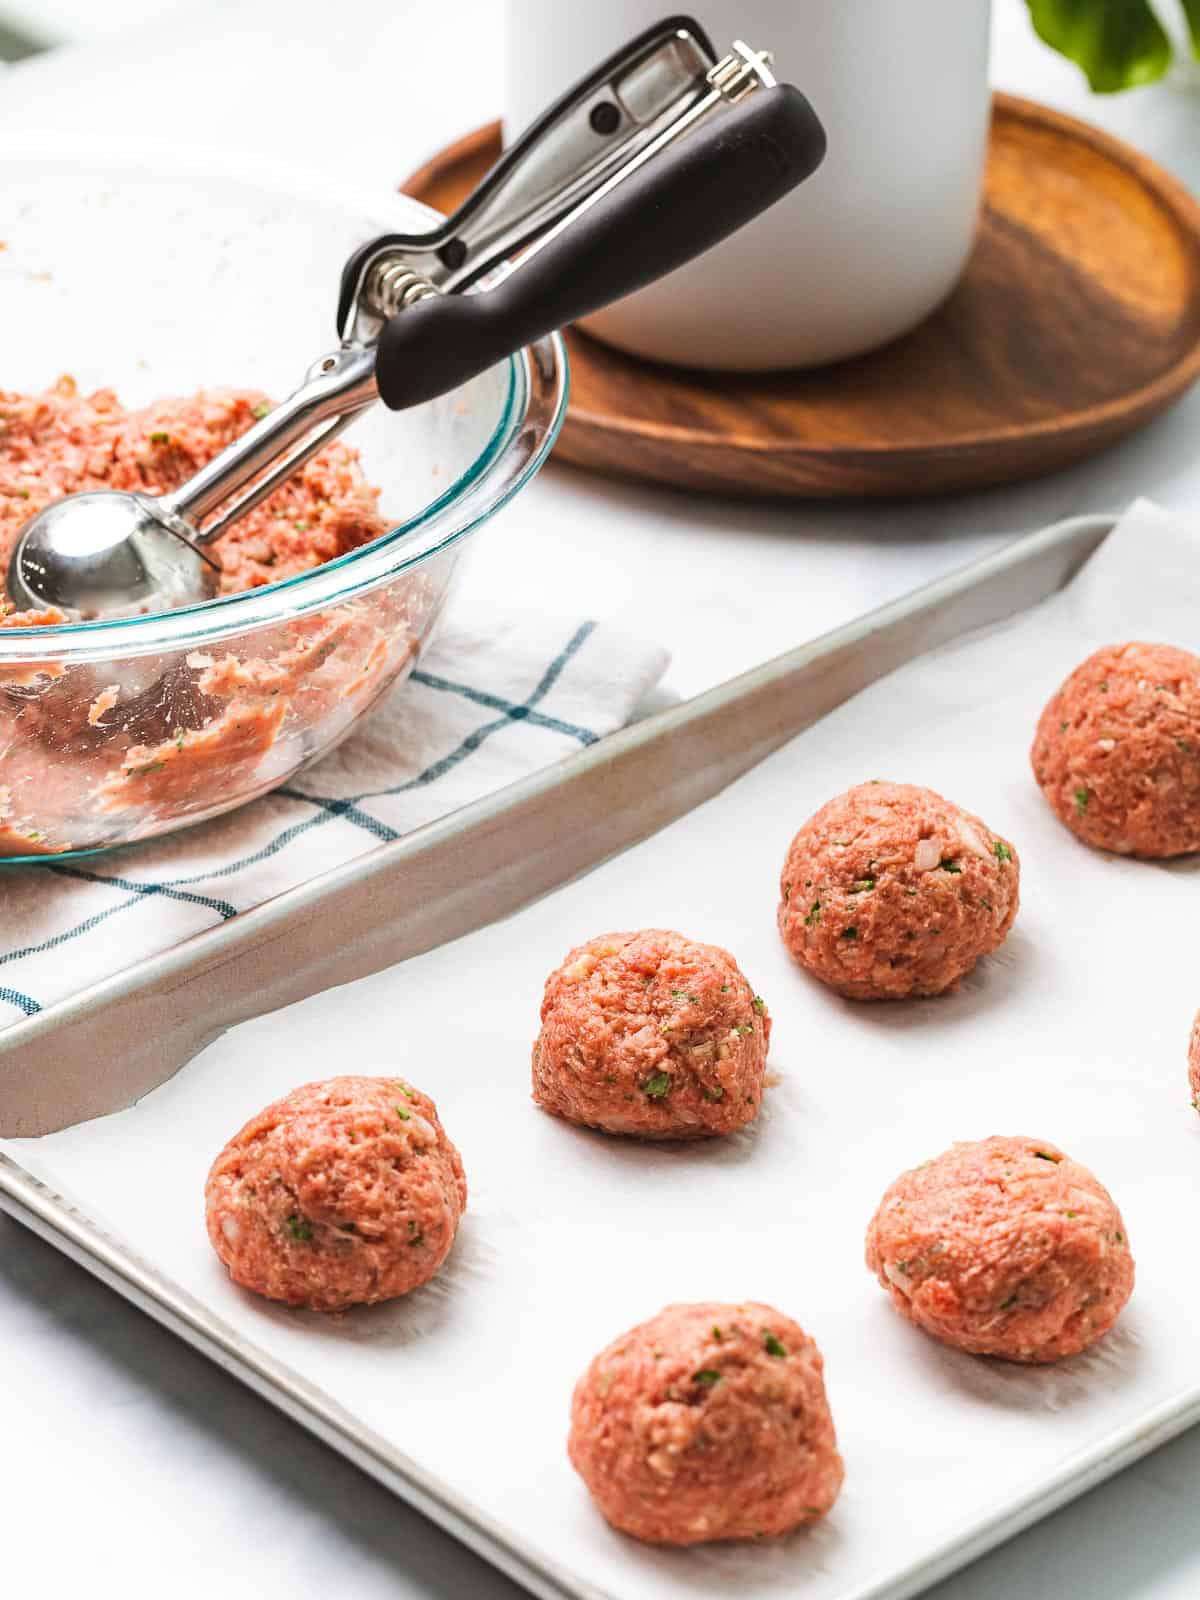 Uncooked meatballs formed on a baking tray.